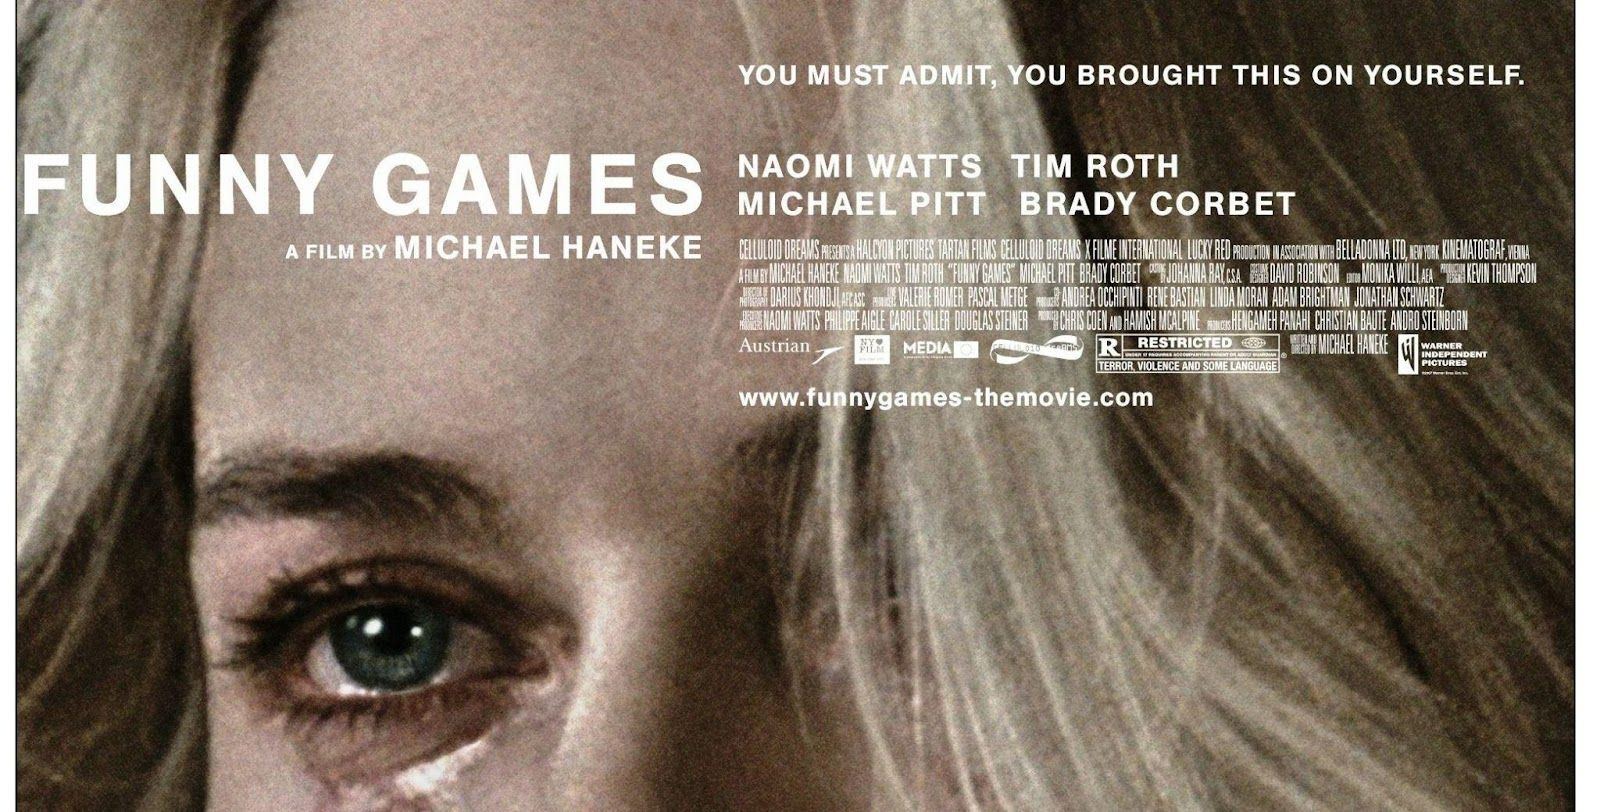 Funny Games wants to make you feel guilty for watching it